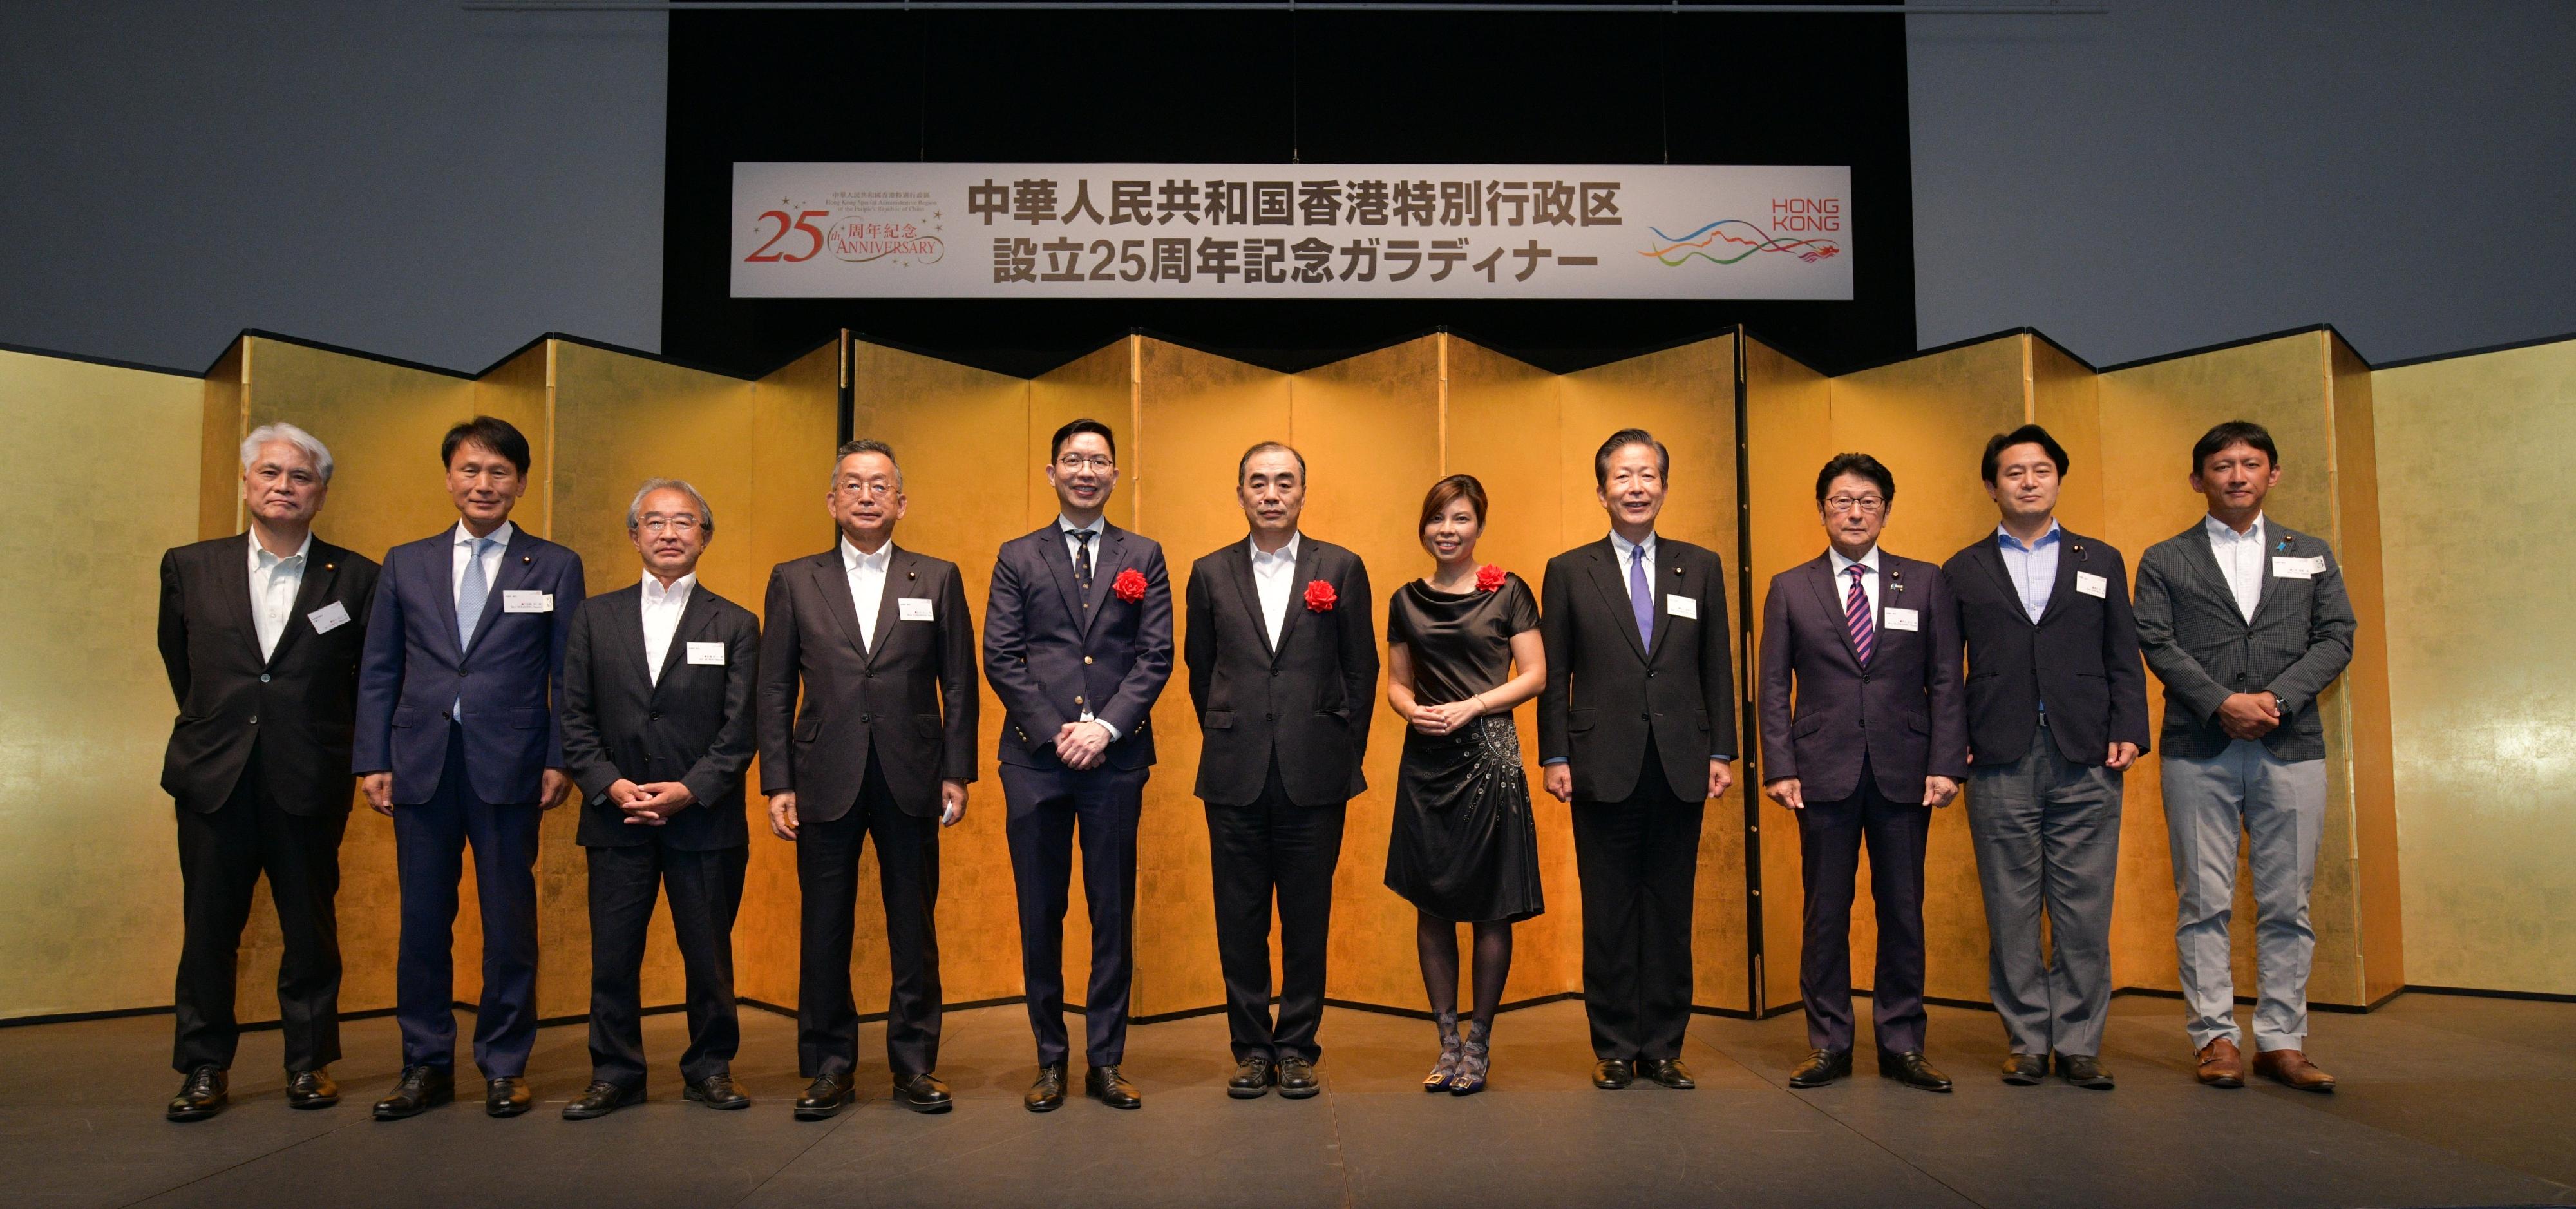 The Acting Principal Hong Kong Economic and Trade Representative (Tokyo), Mr Thomas Wu (fifth left); the Chinese Ambassador to Japan, Mr Kong Xuanyou (centre); the Hong Kong Economic and Trade Representative (Tokyo) (designate), Miss Winsome Au (fifth right), and Japan National Diet Members are pictured at the gala dinner held in Tokyo to mark the 25th anniversary of the establishment of the Hong Kong Special Administrative Region today (July 29).